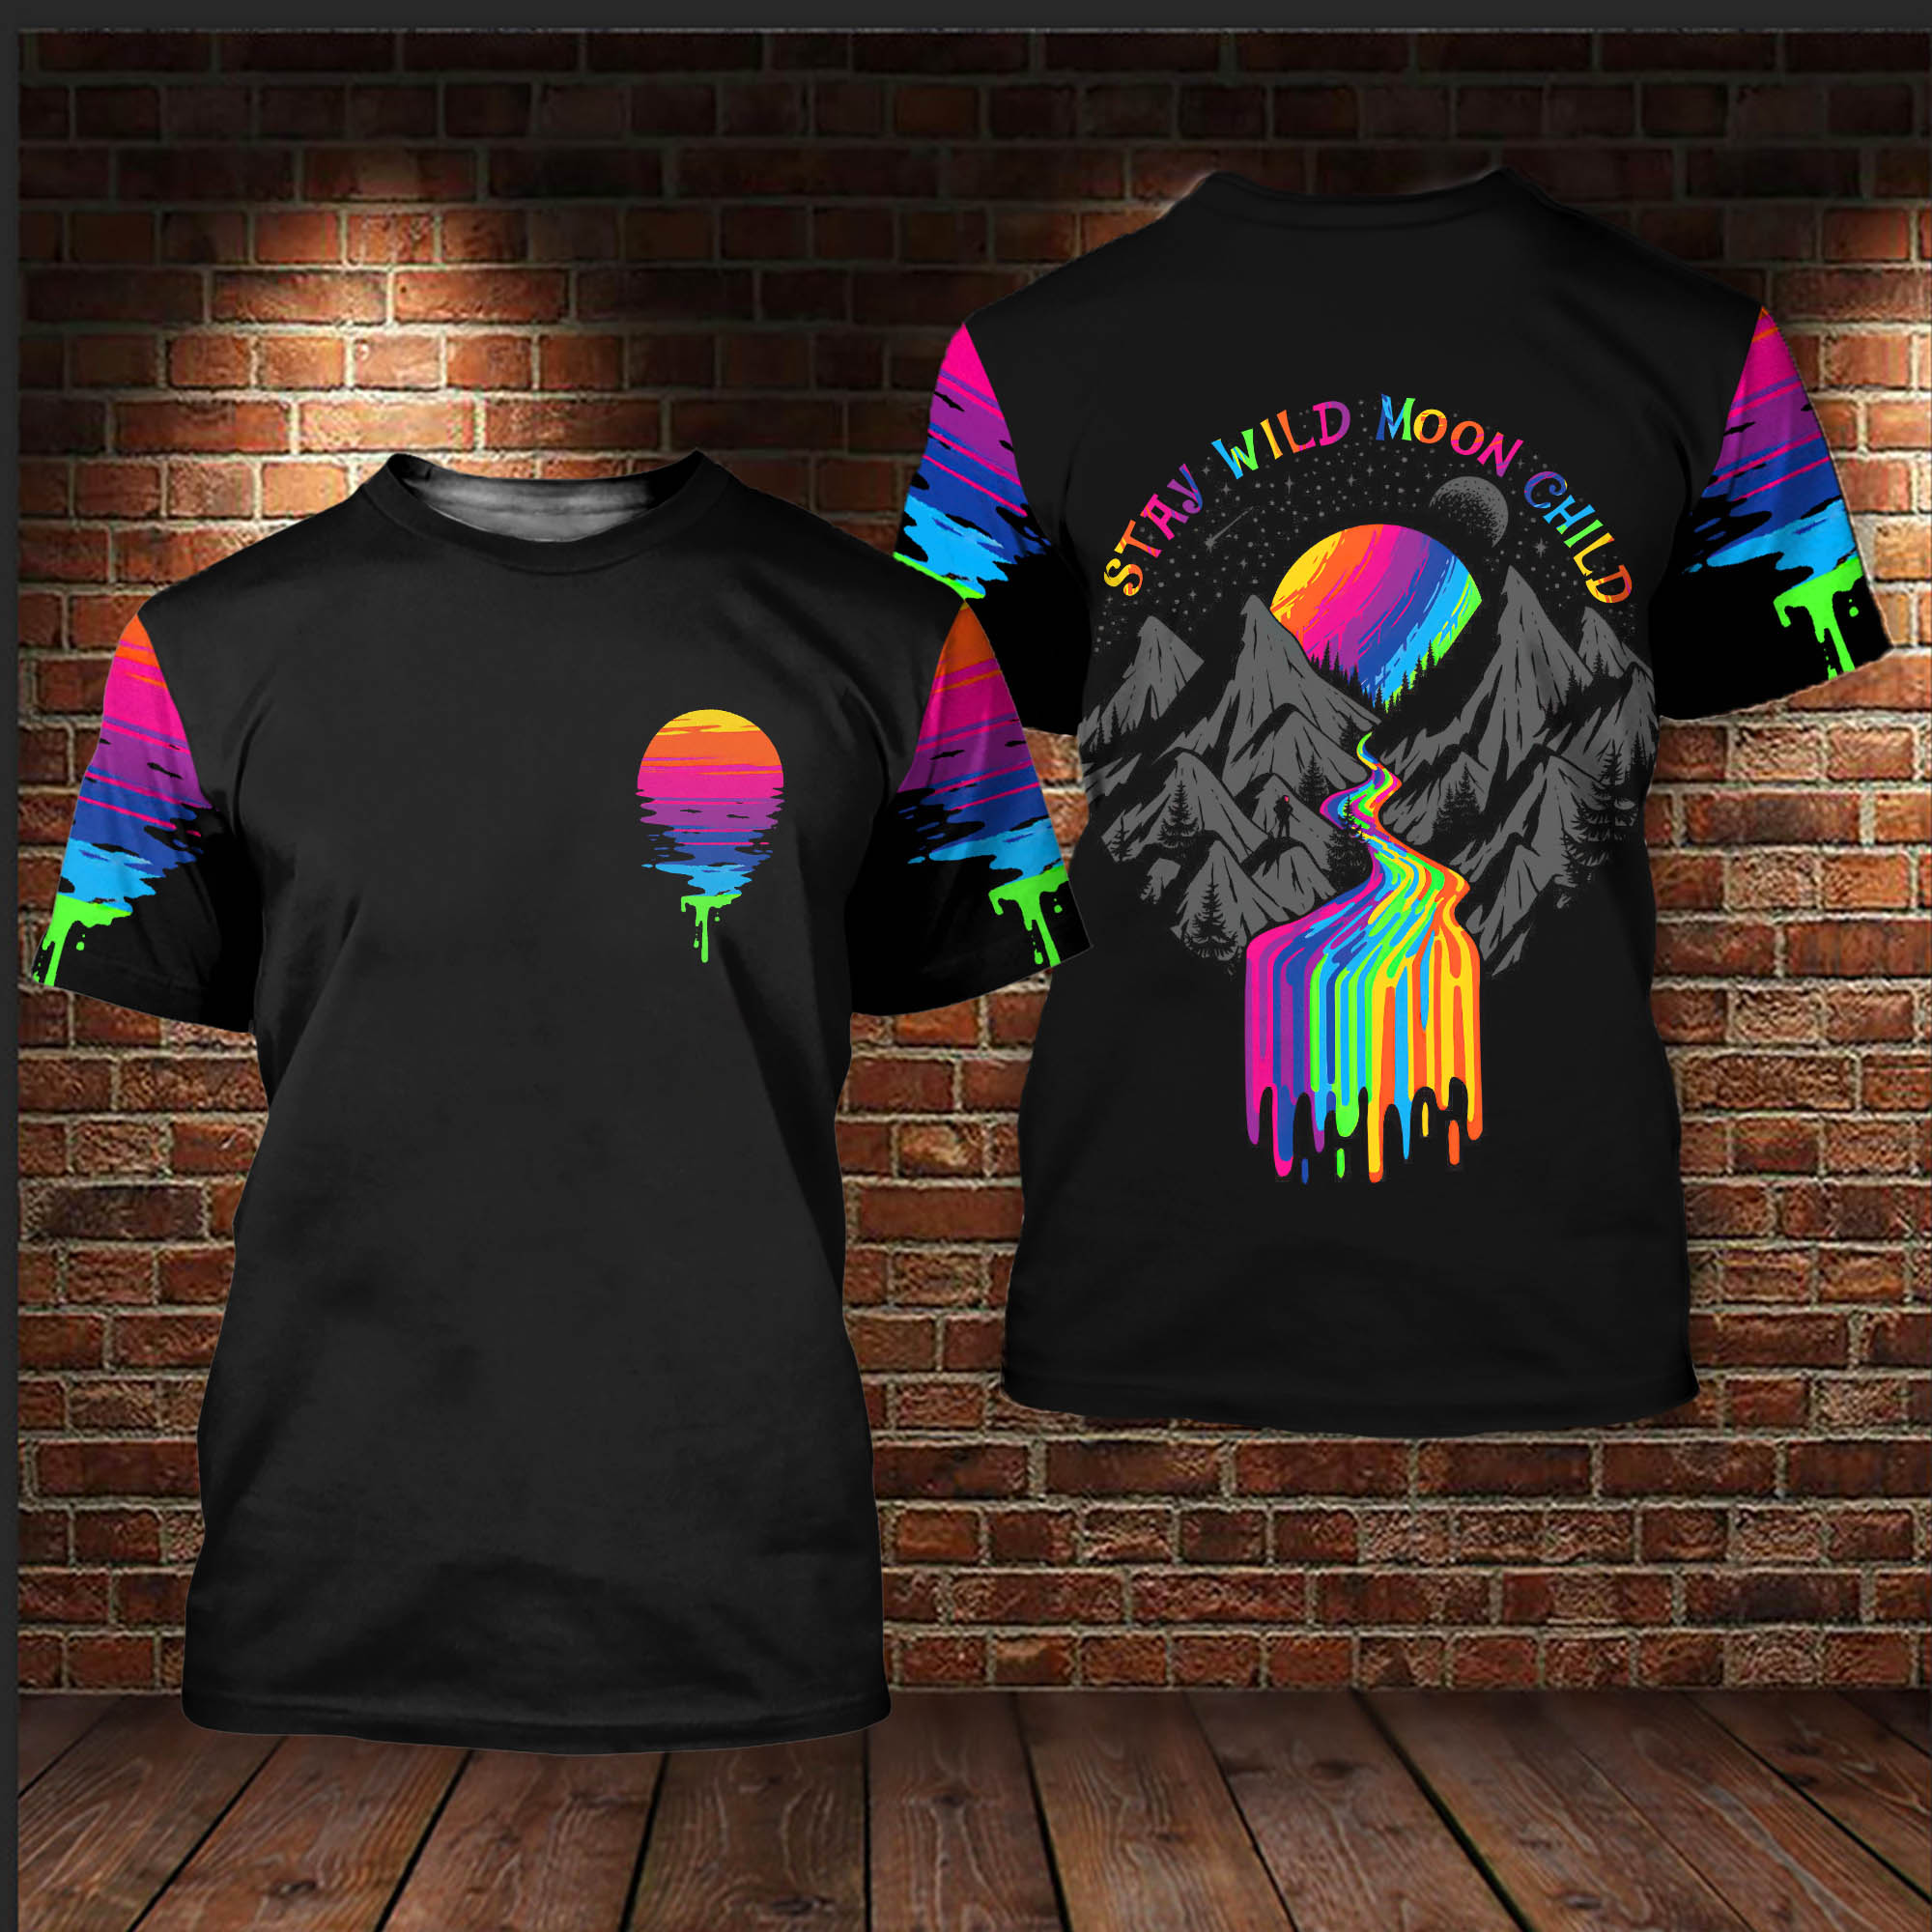 LGBT Stay Wild Moon Child 3D All Over Printed Shirts For LGBT Community/ Bisexual Shirts For LGBT History Month